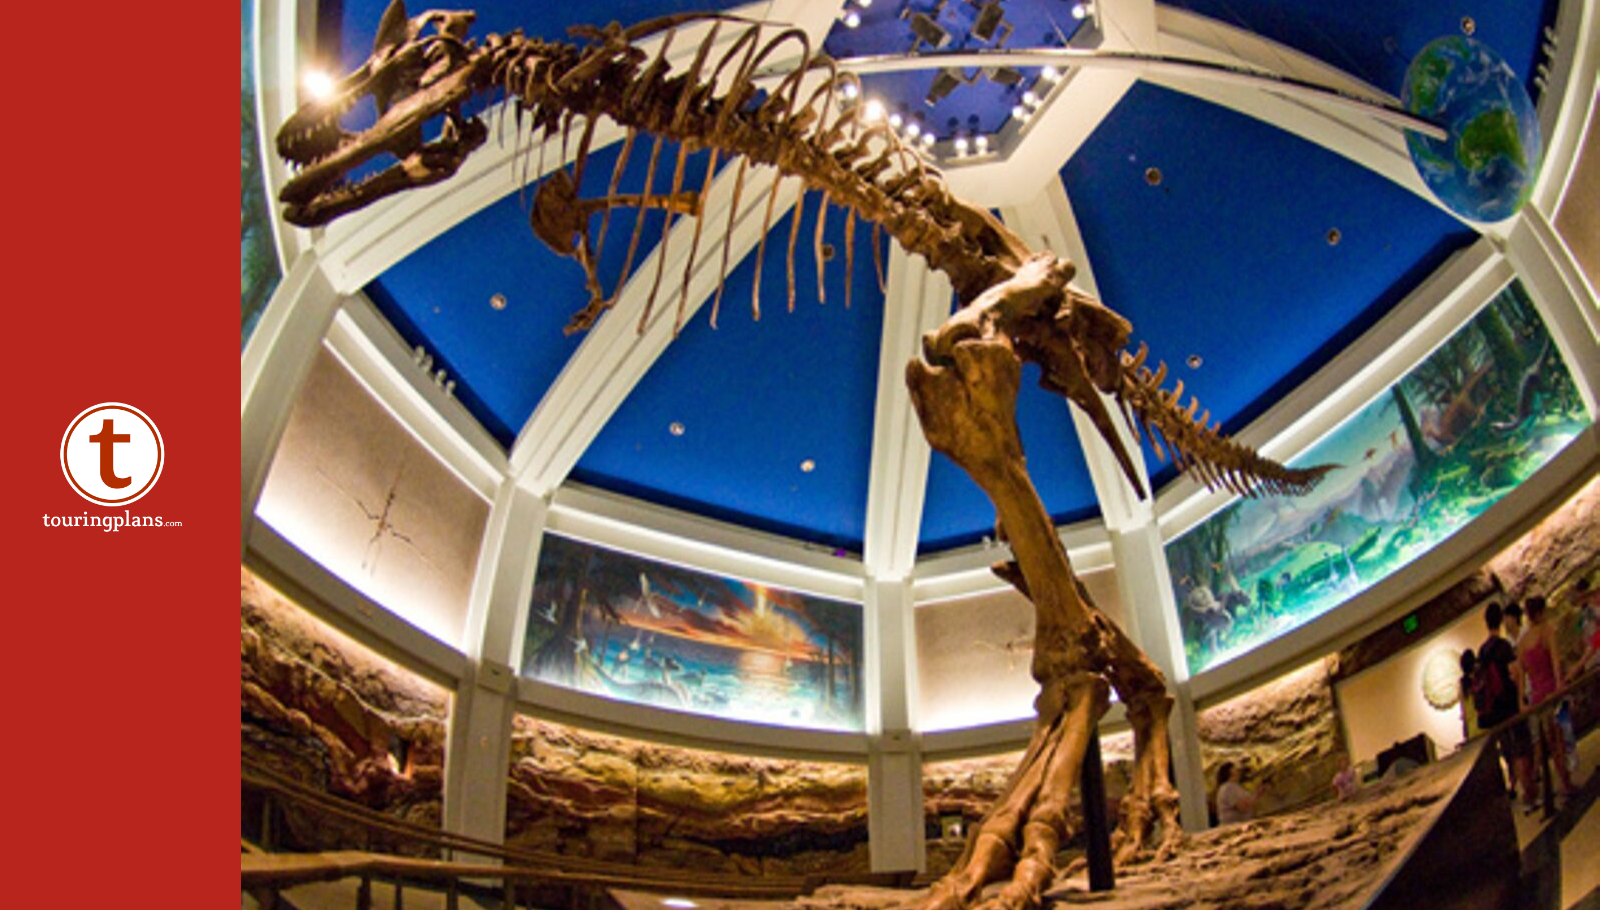 Five Things You Might Not Know About DINOSAUR - WDW Magazine